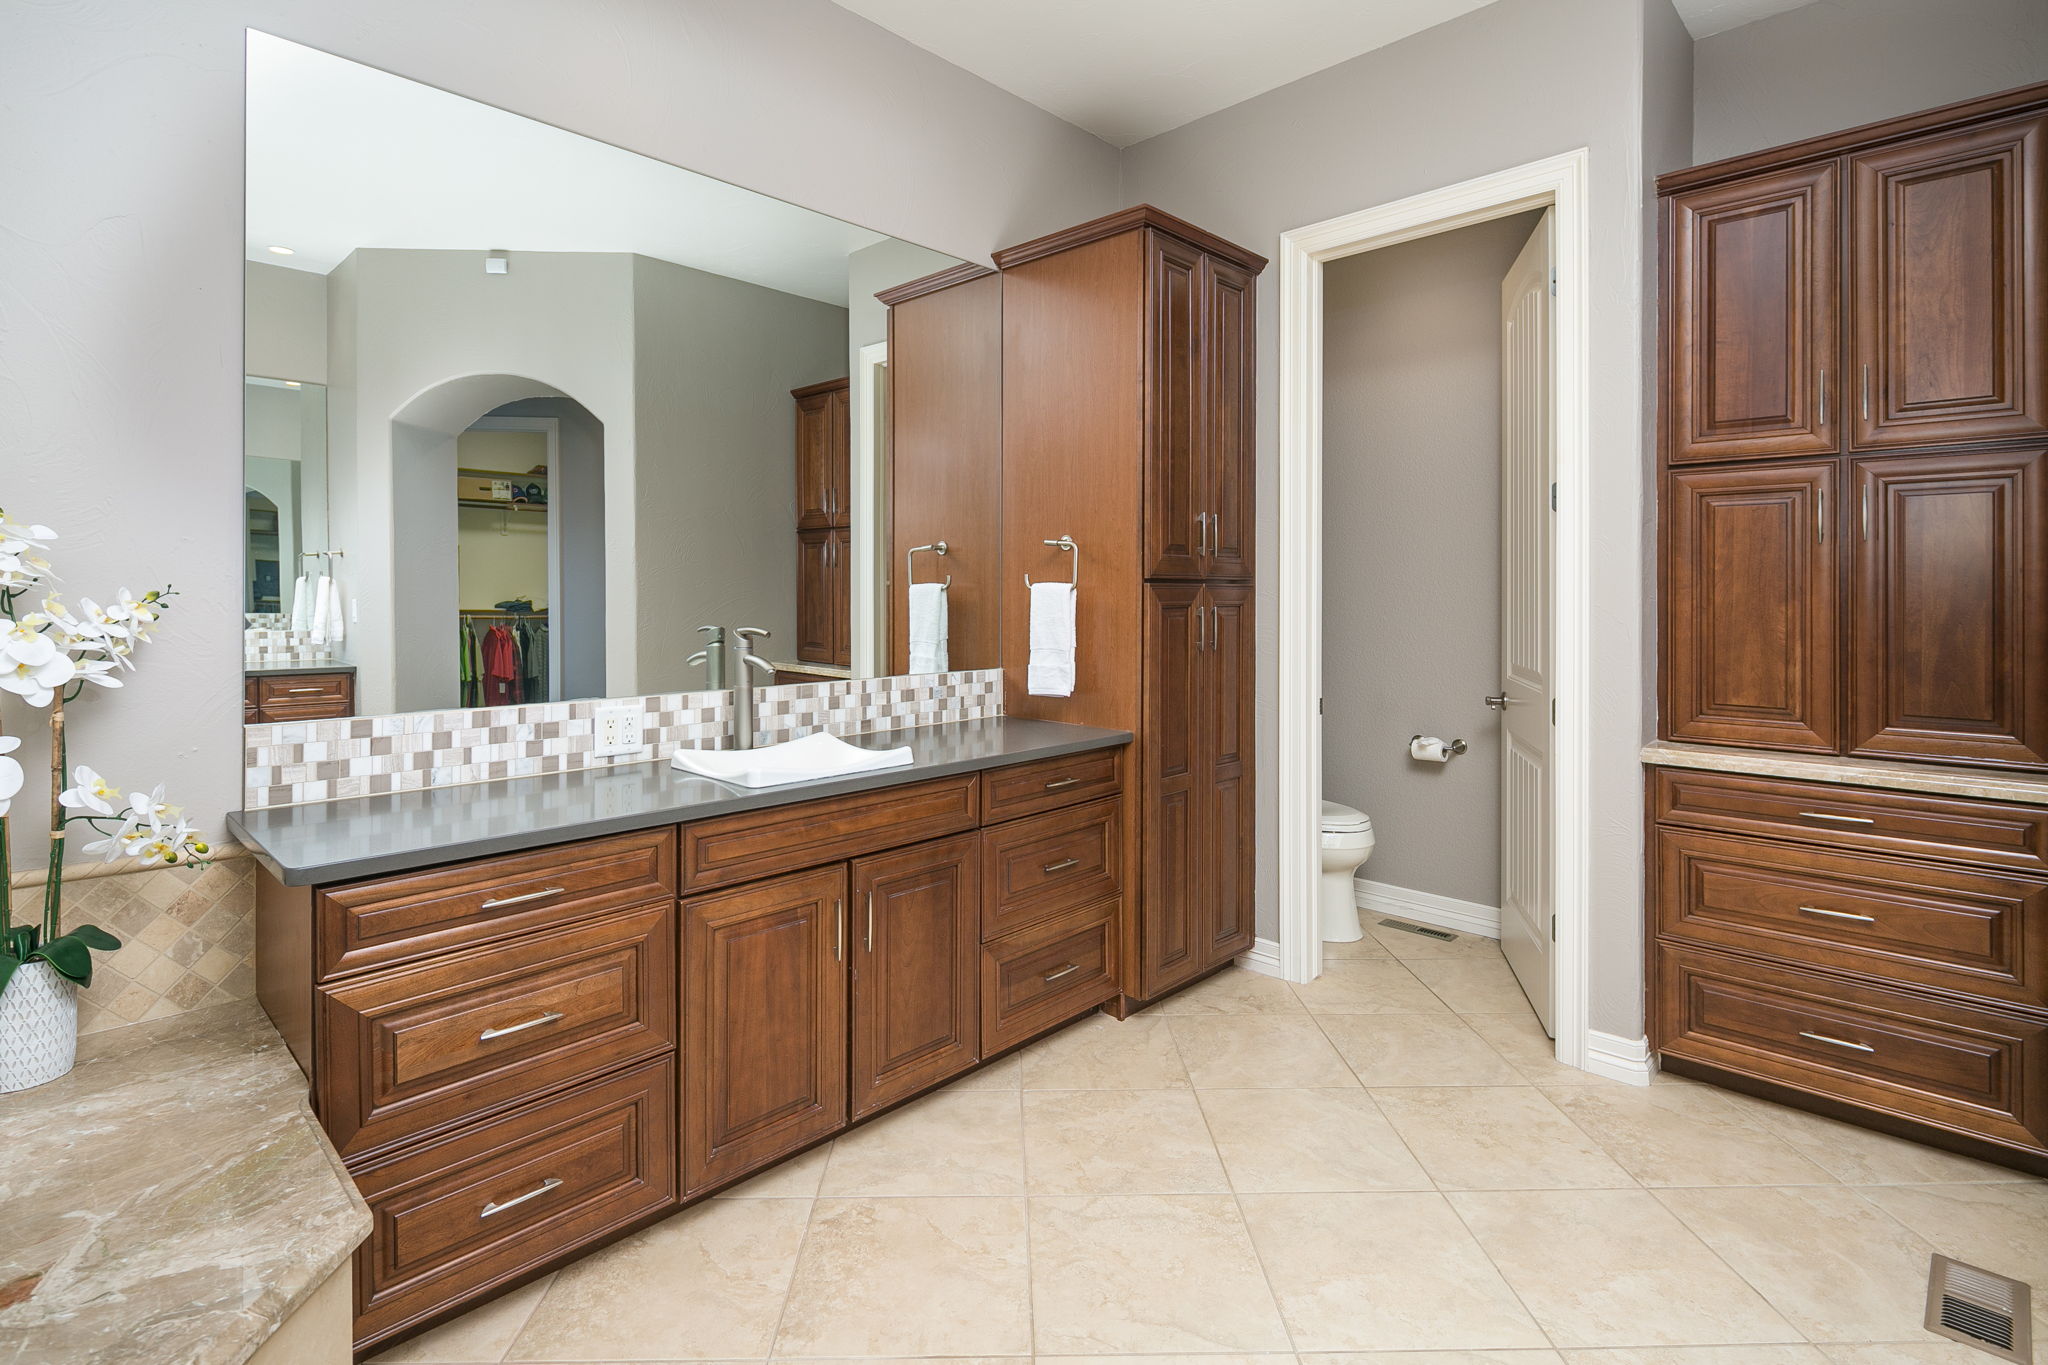 Nice Tile Details and Walk-In Closet in Master Bath